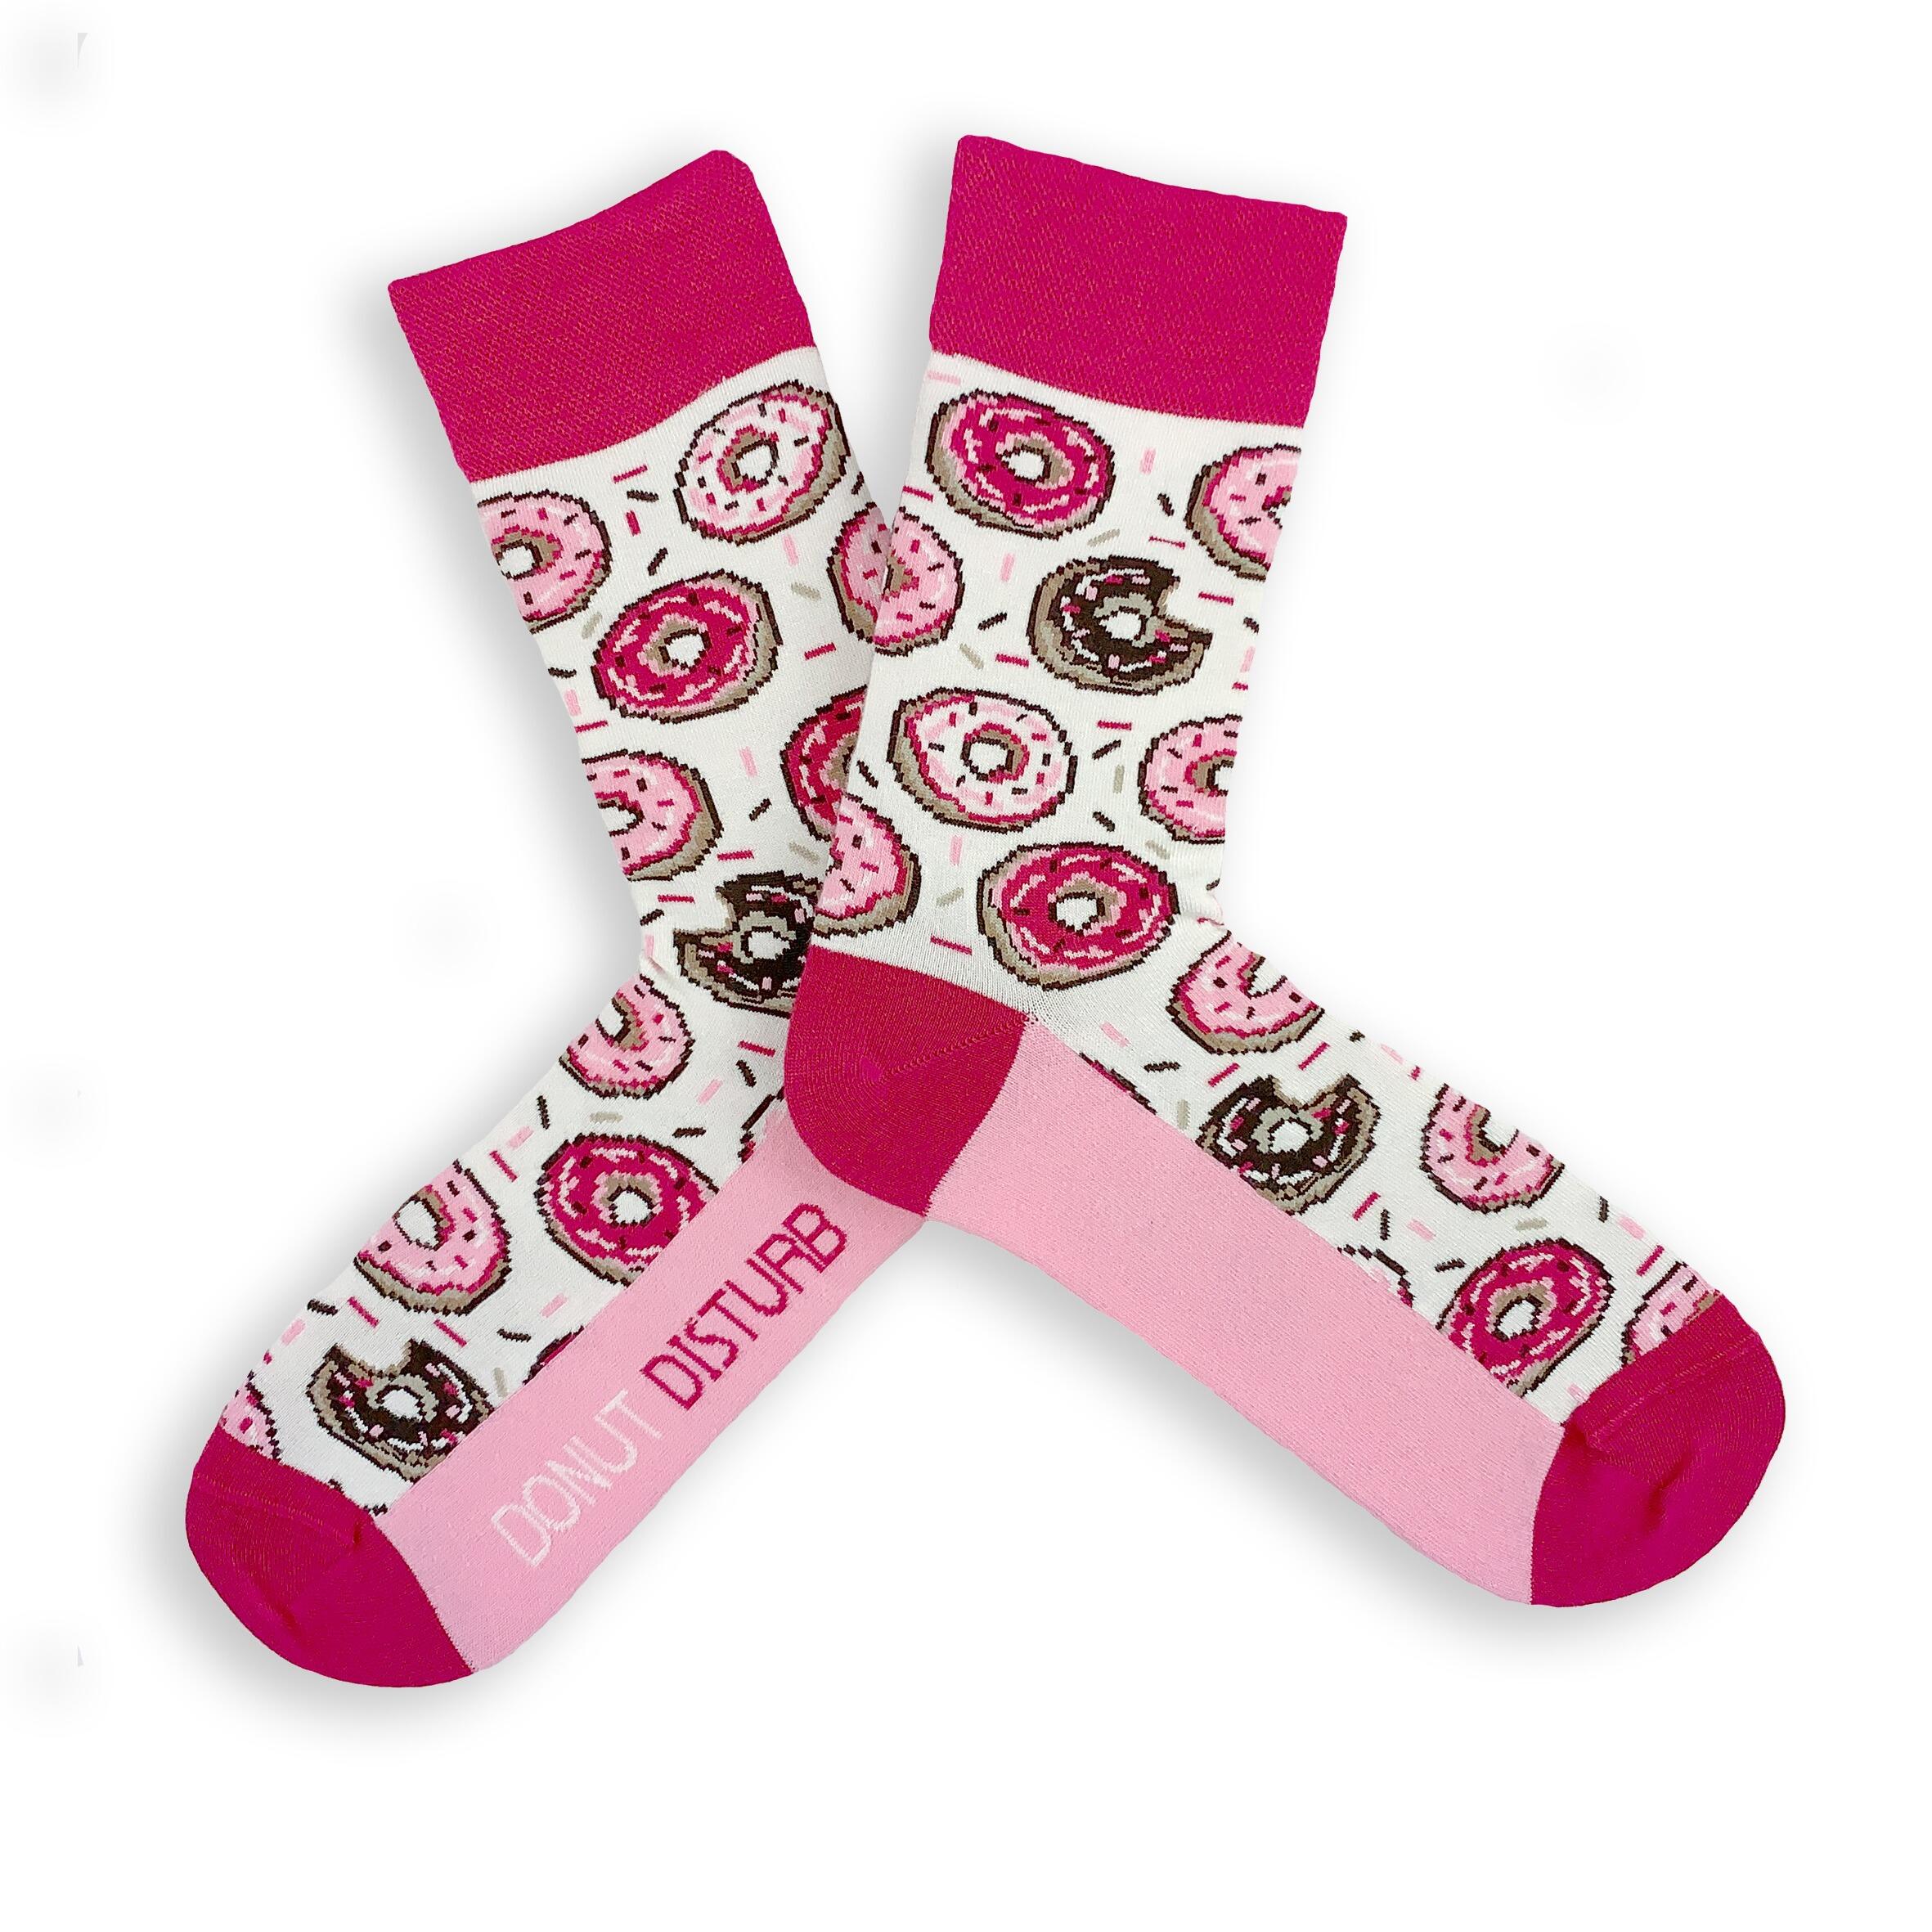 Donut themed funky sustainable bamboo socks gift